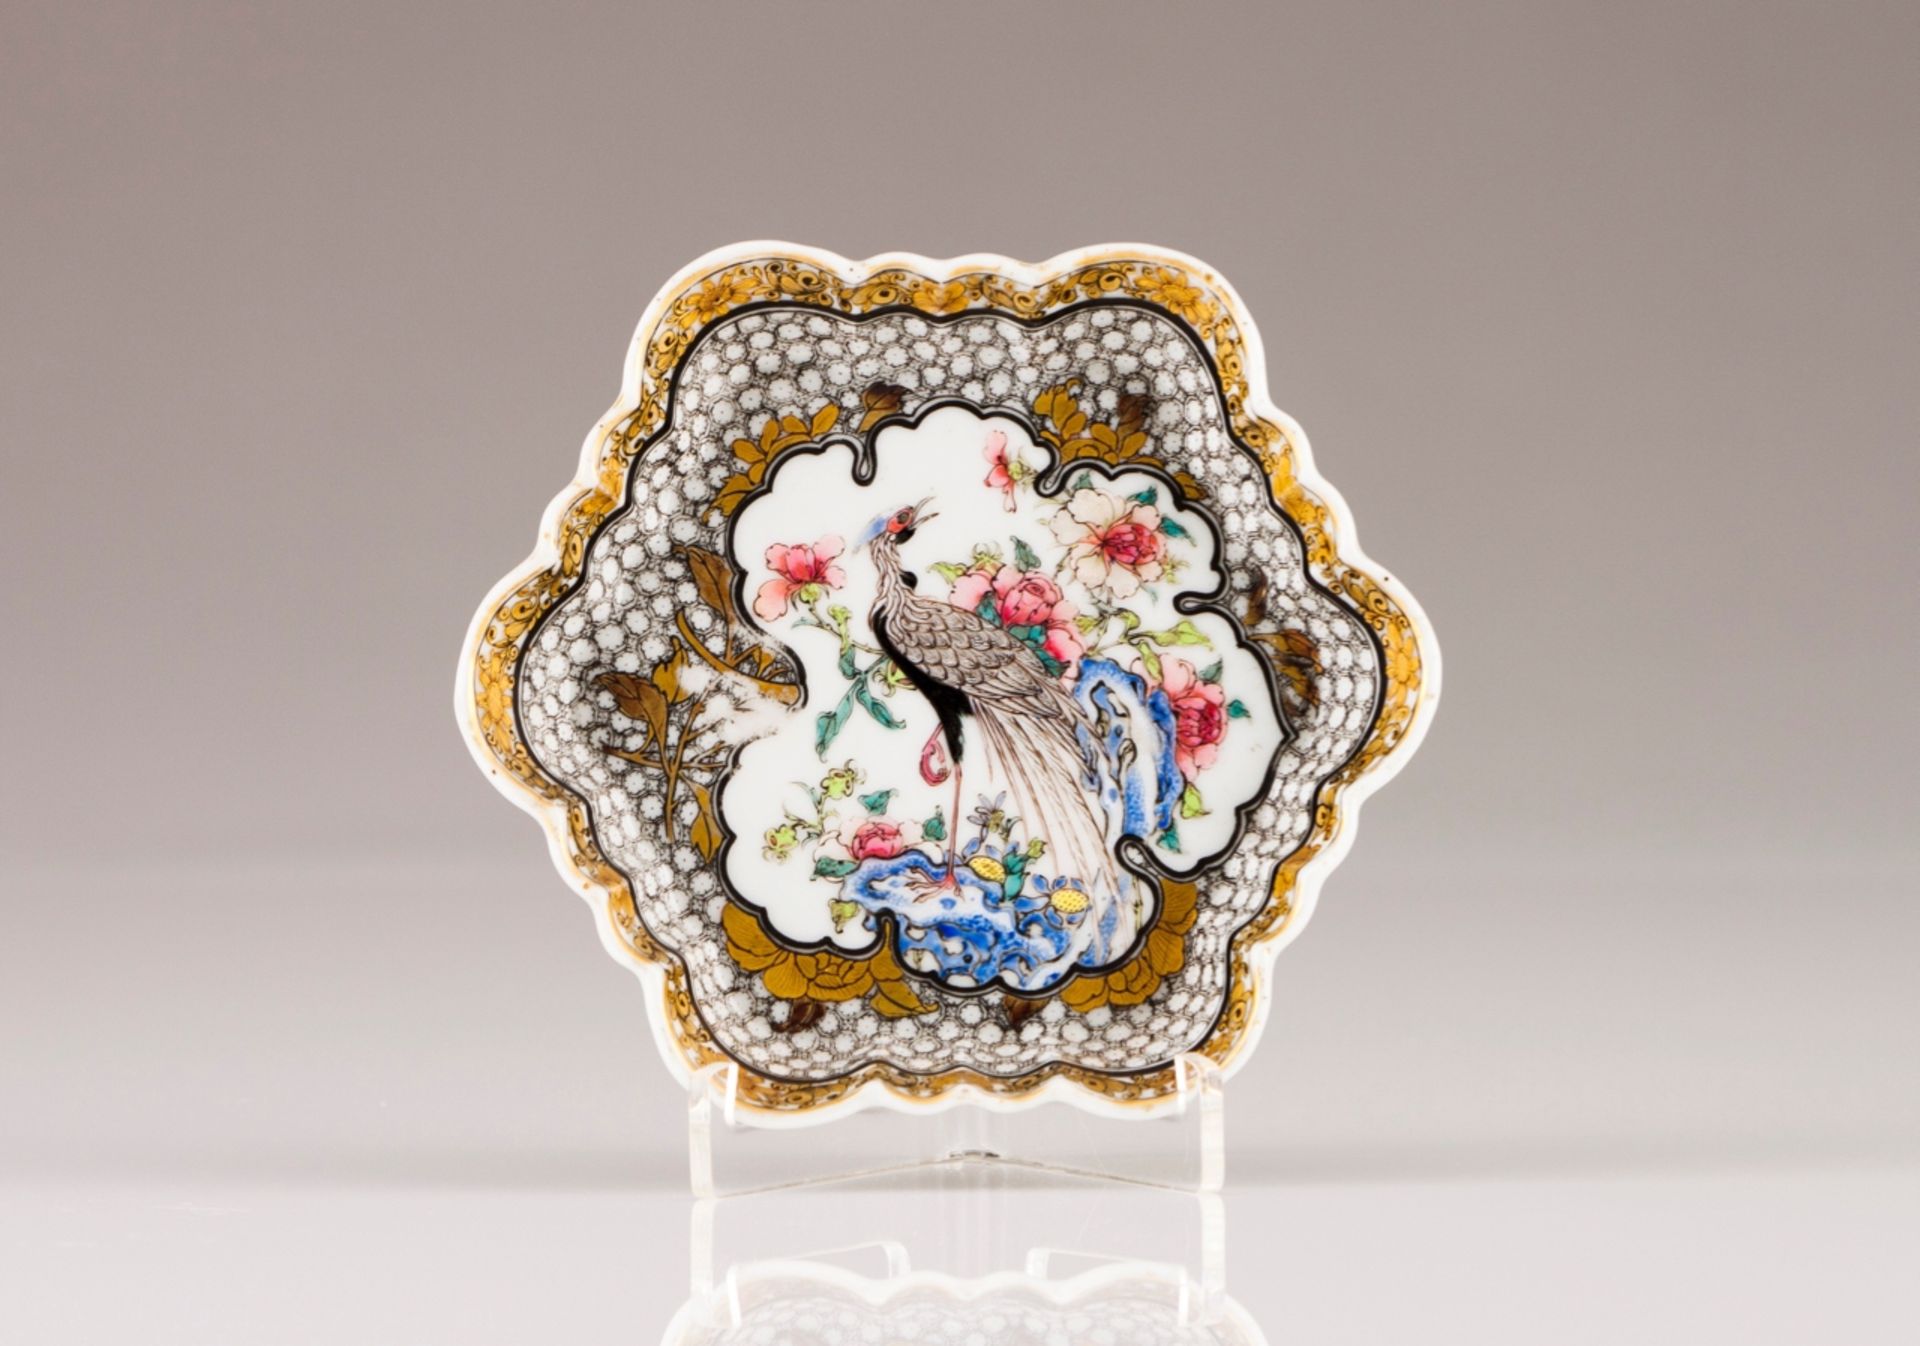 A Yongzheng scalloped saucer
Chinese export porcelain
Gilt, grisaille and polychrome decoration